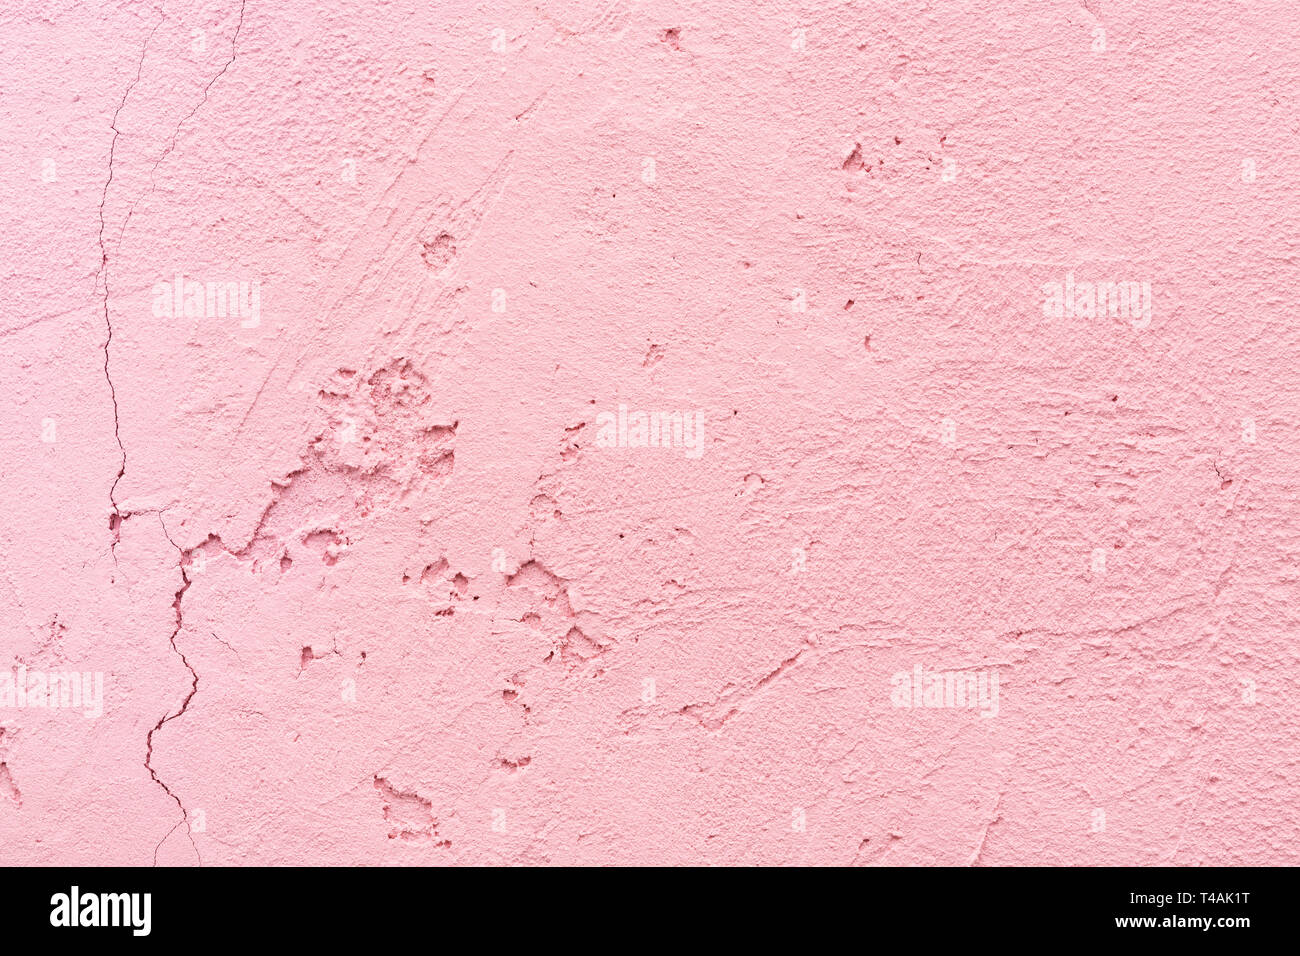 Cracked texture of plaster wall. Pink stucco close-up. Abstract background, interior decor. Stock Photo